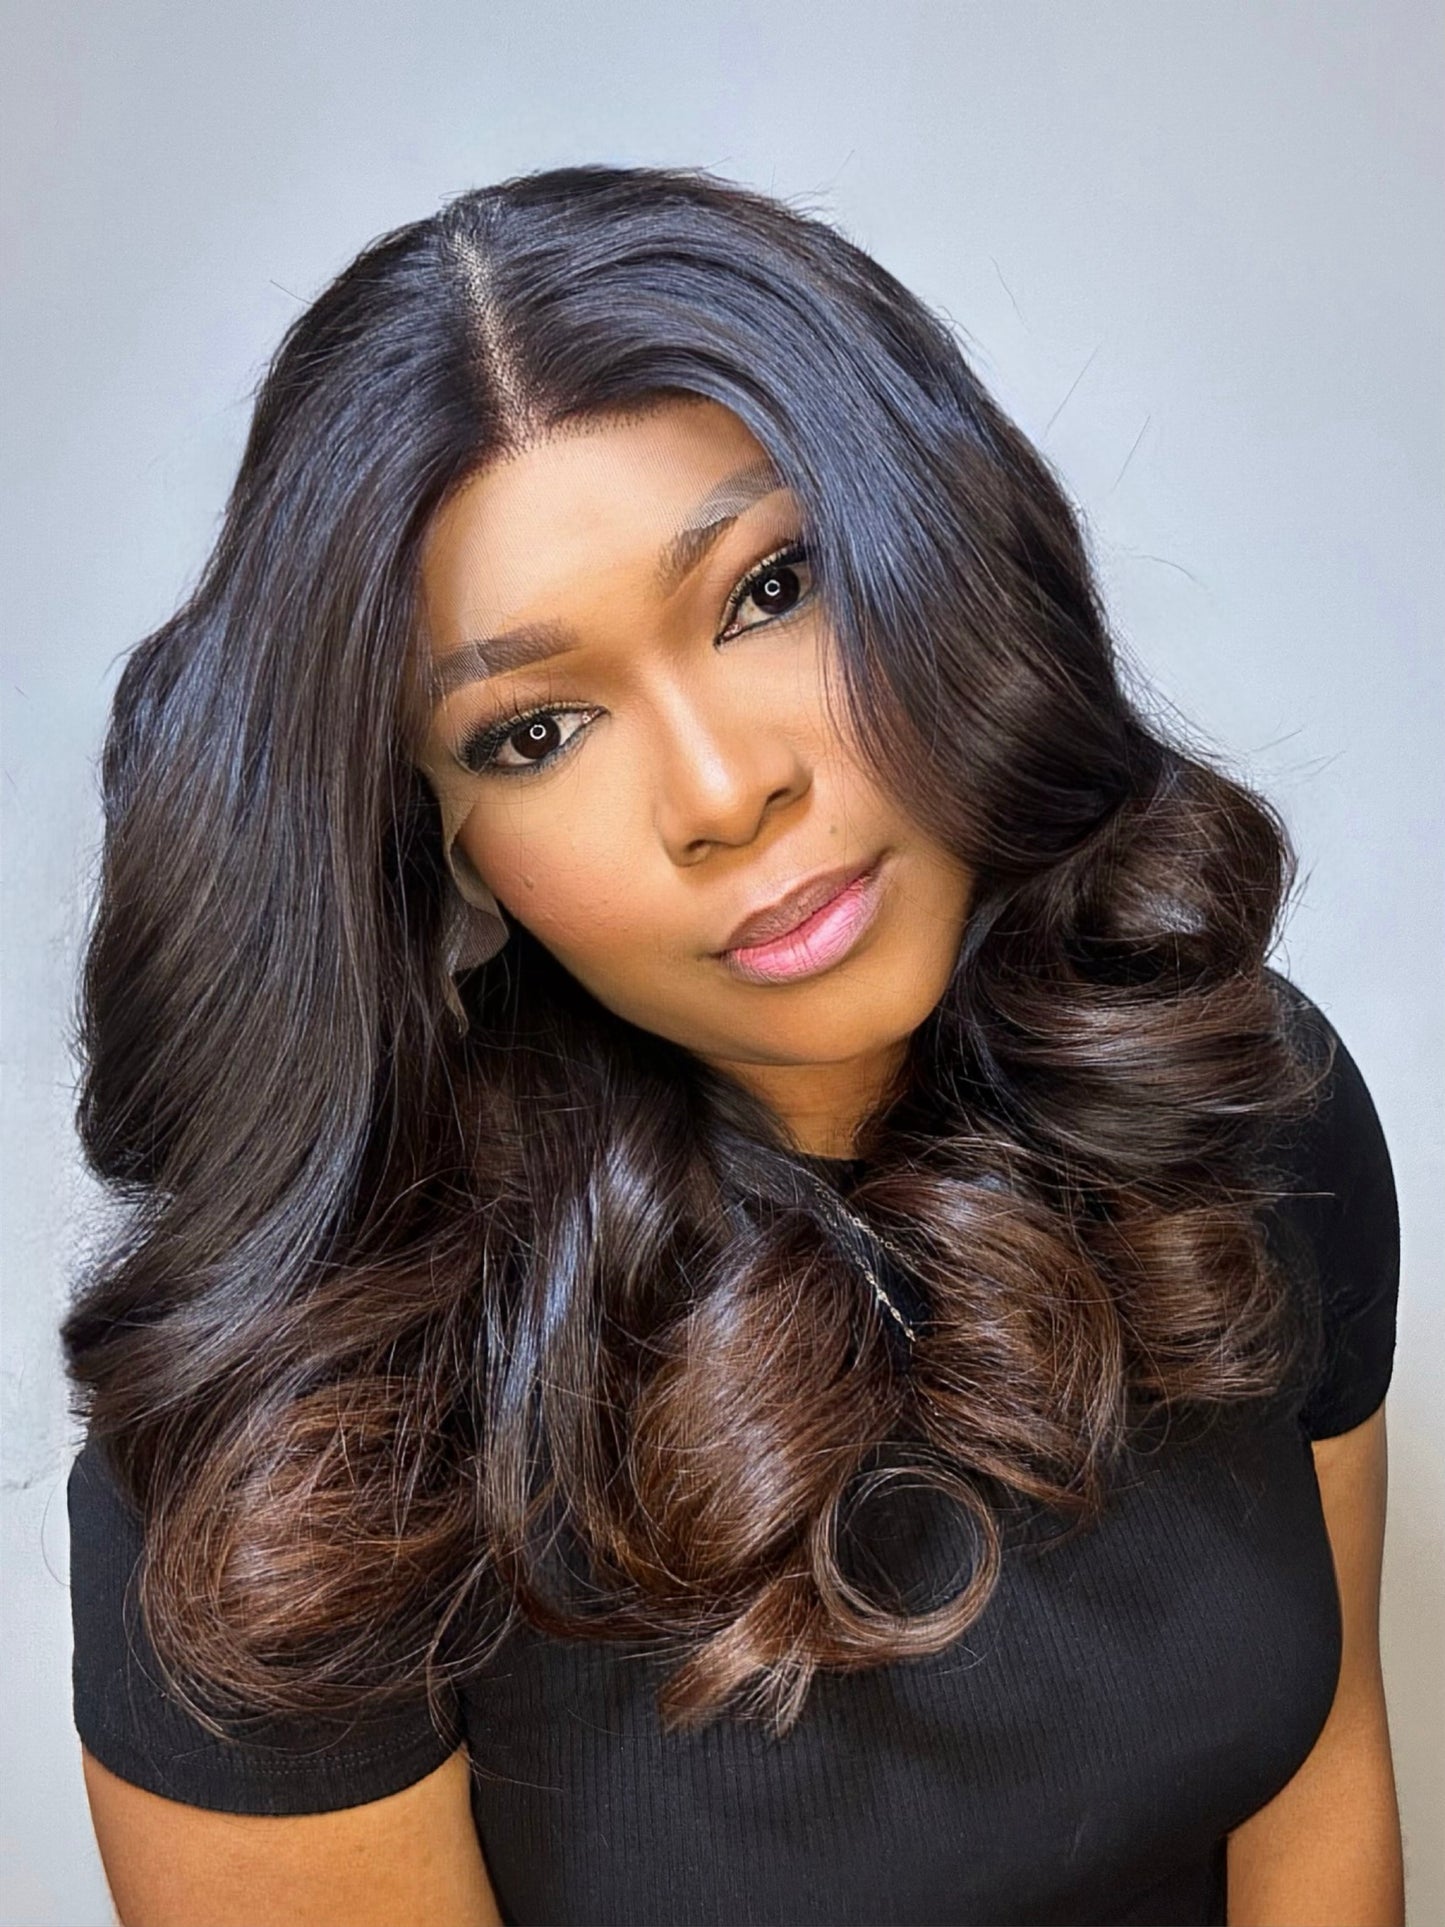 RAW INDONESIAN BRUNETTE WAVY LACE FRONTAL WIG